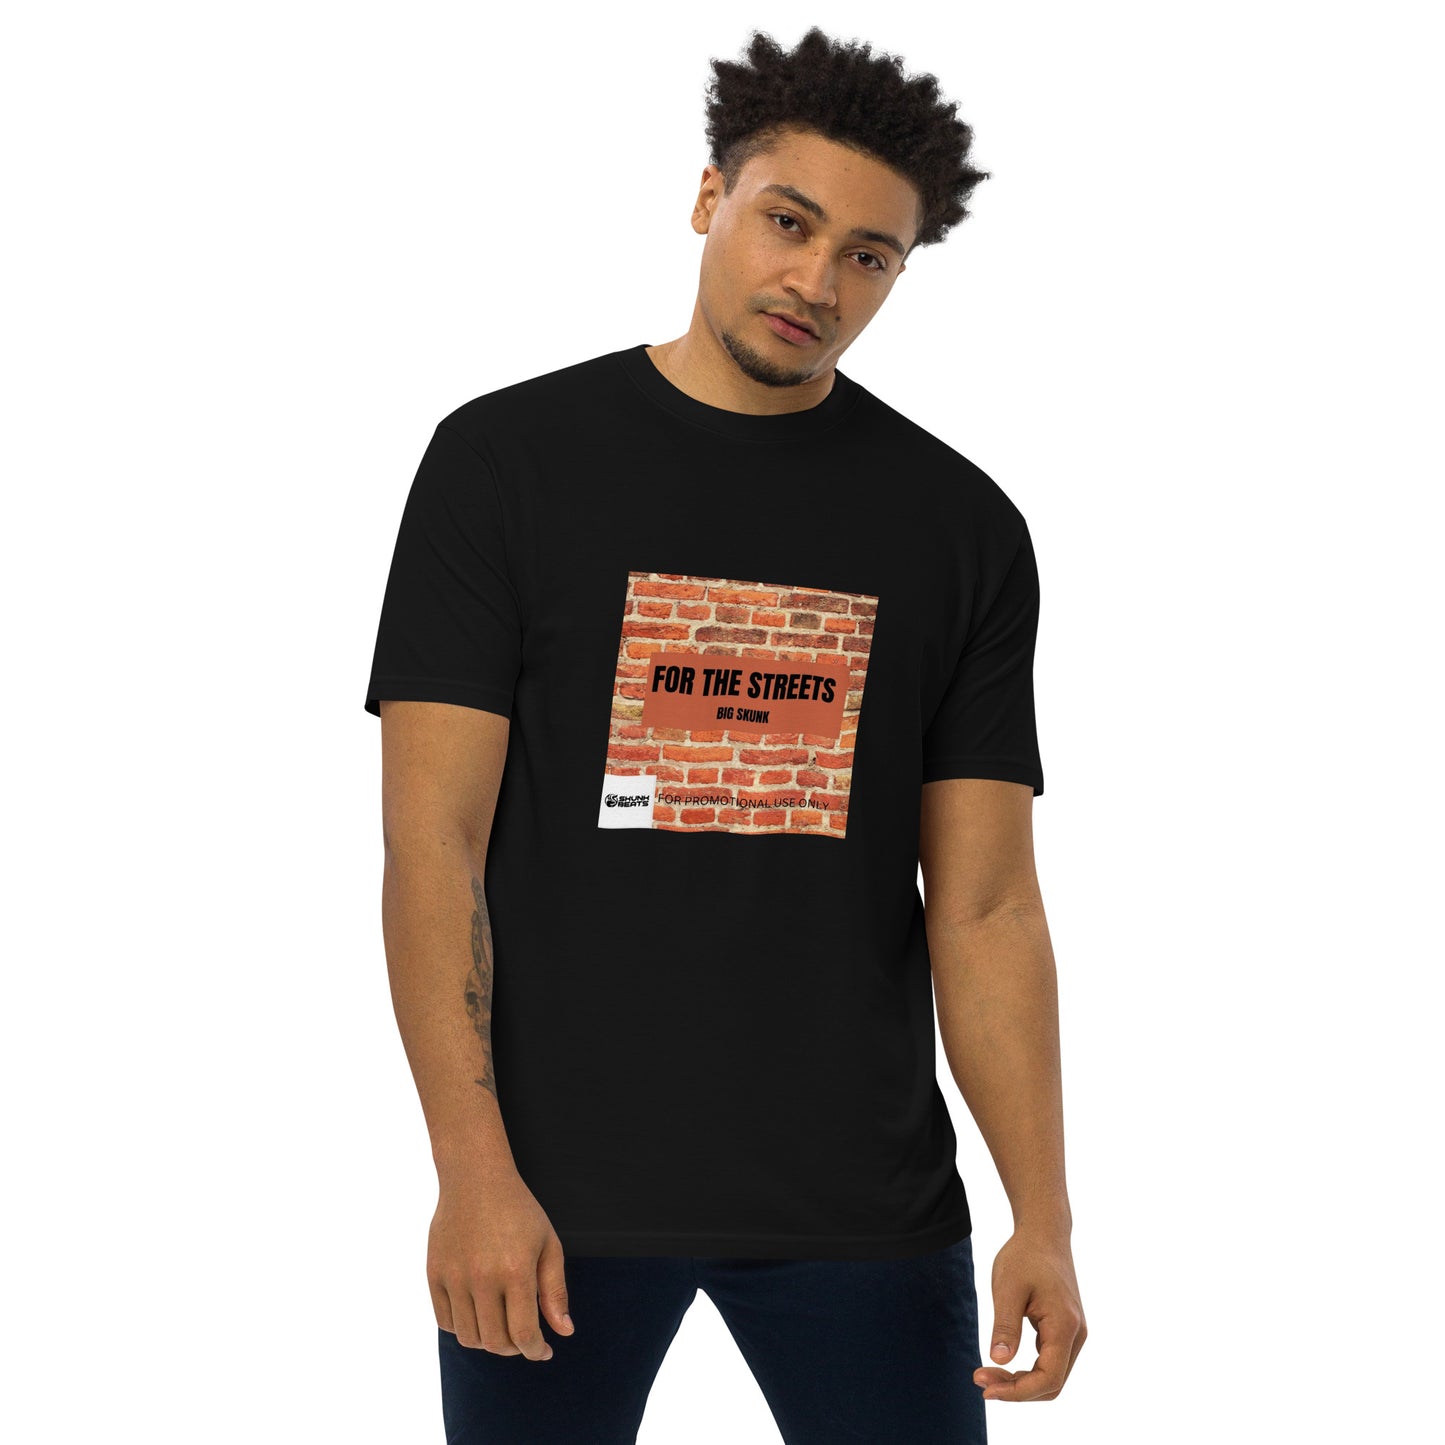 FOR THE STREETS Men’s premium heavyweight tee